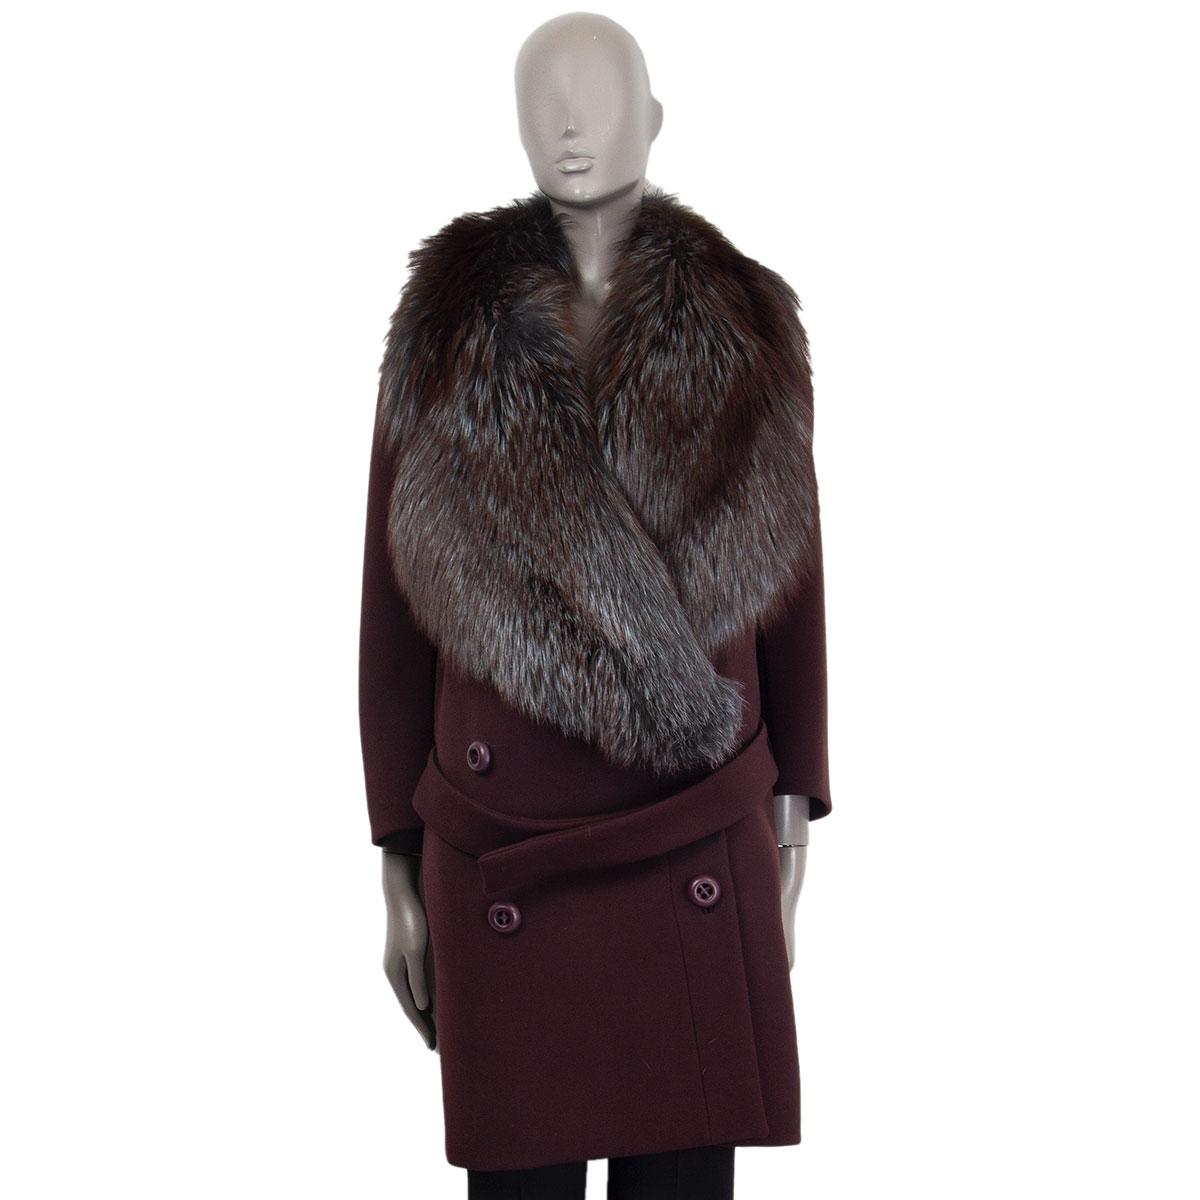 Prada belted oversize fur-collar runway coat in maroon wool (100%- tag has been removed) with a a brown and turquoise fur collar, 3/4 sleeves and slit pockets. Closes on the front with snap buttons. Lined in viscose (assumed as tag is missing). Has